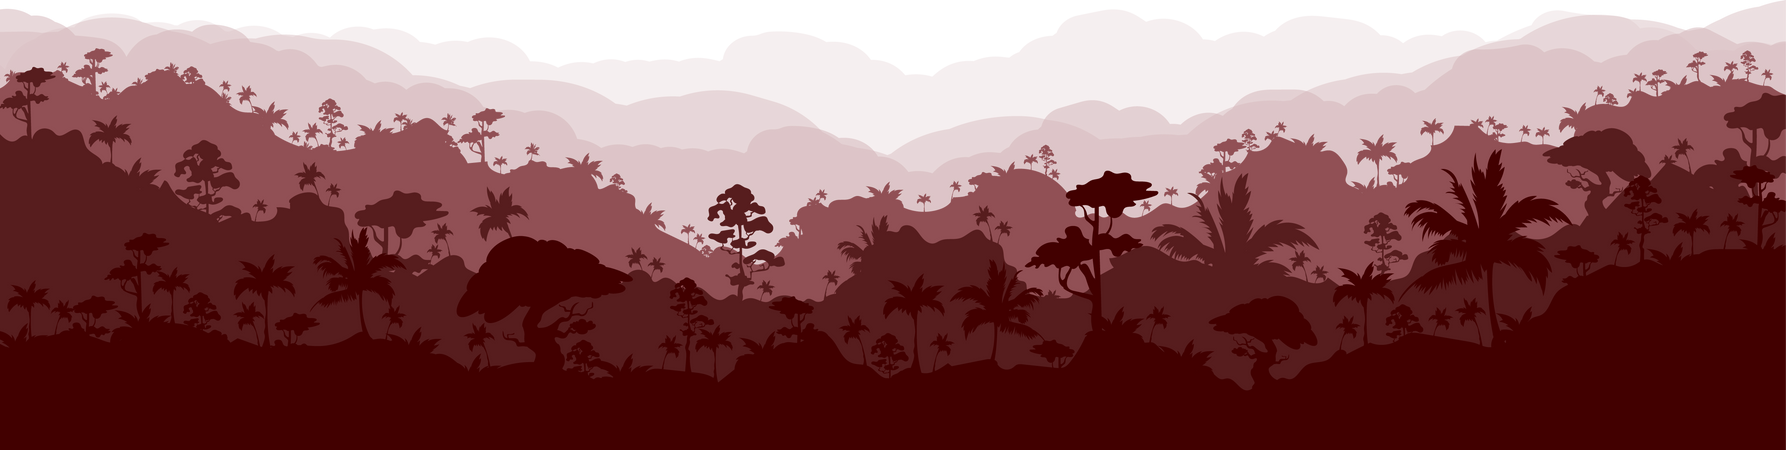 Brown forest scenery Illustration